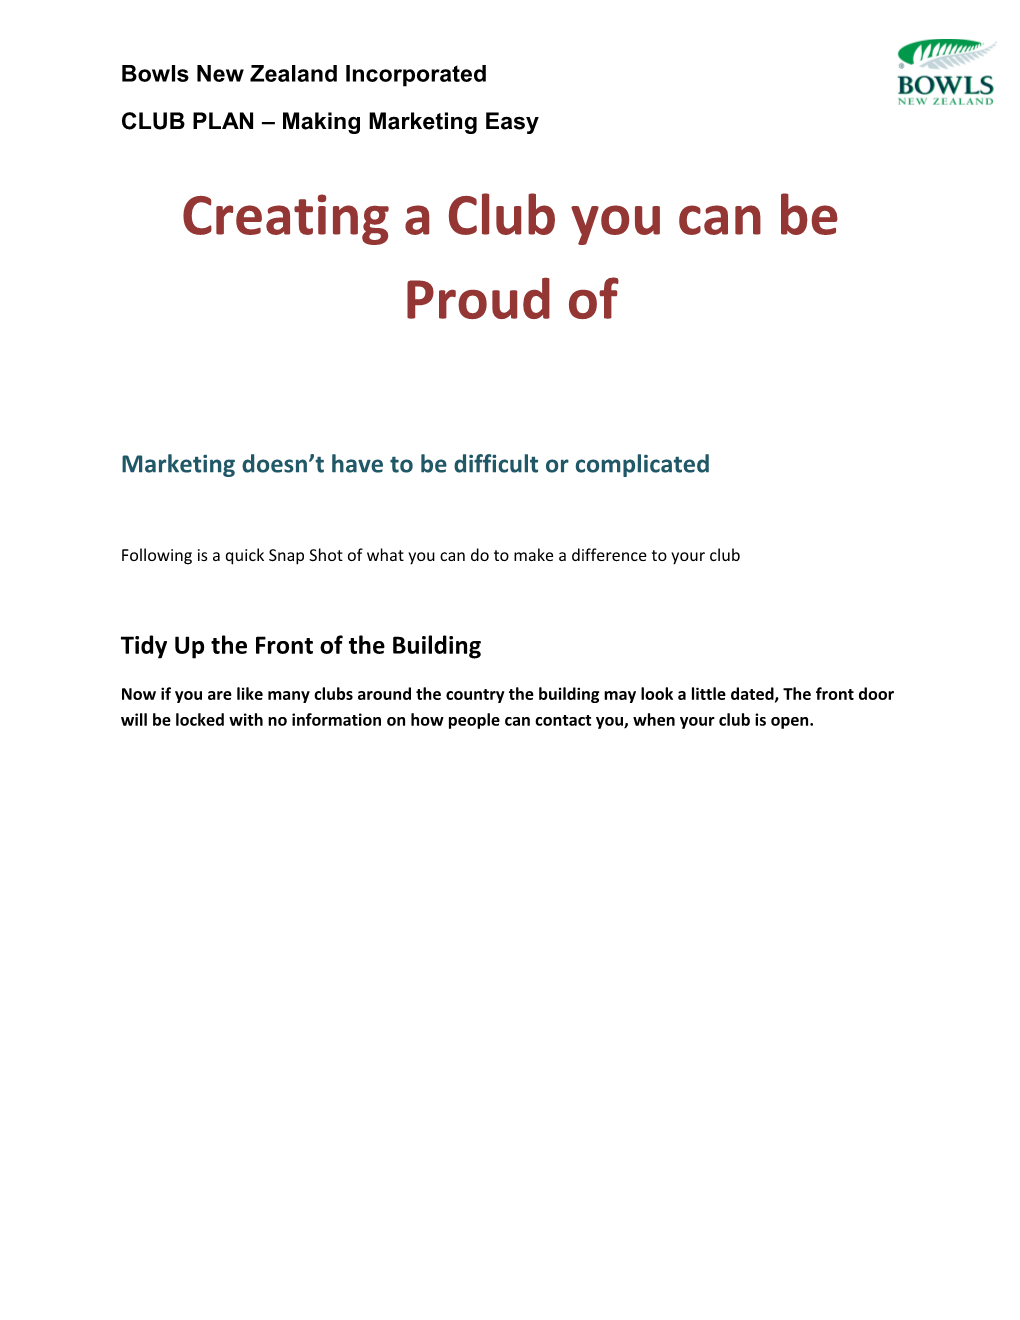 Creating a Club You Can Be Proud Of